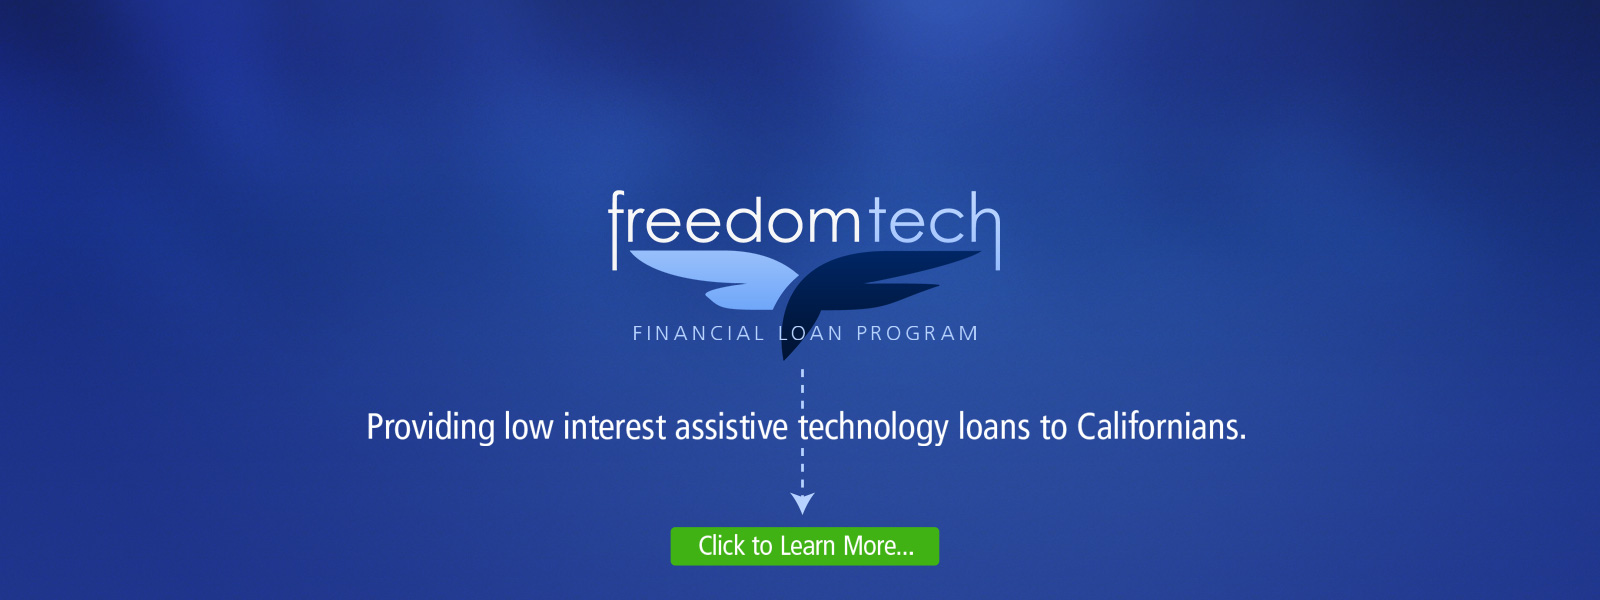 Banner of the FreedomTech Financial Loan Program. Providing low interest assistive technology loans to Californians. Click to learn more.